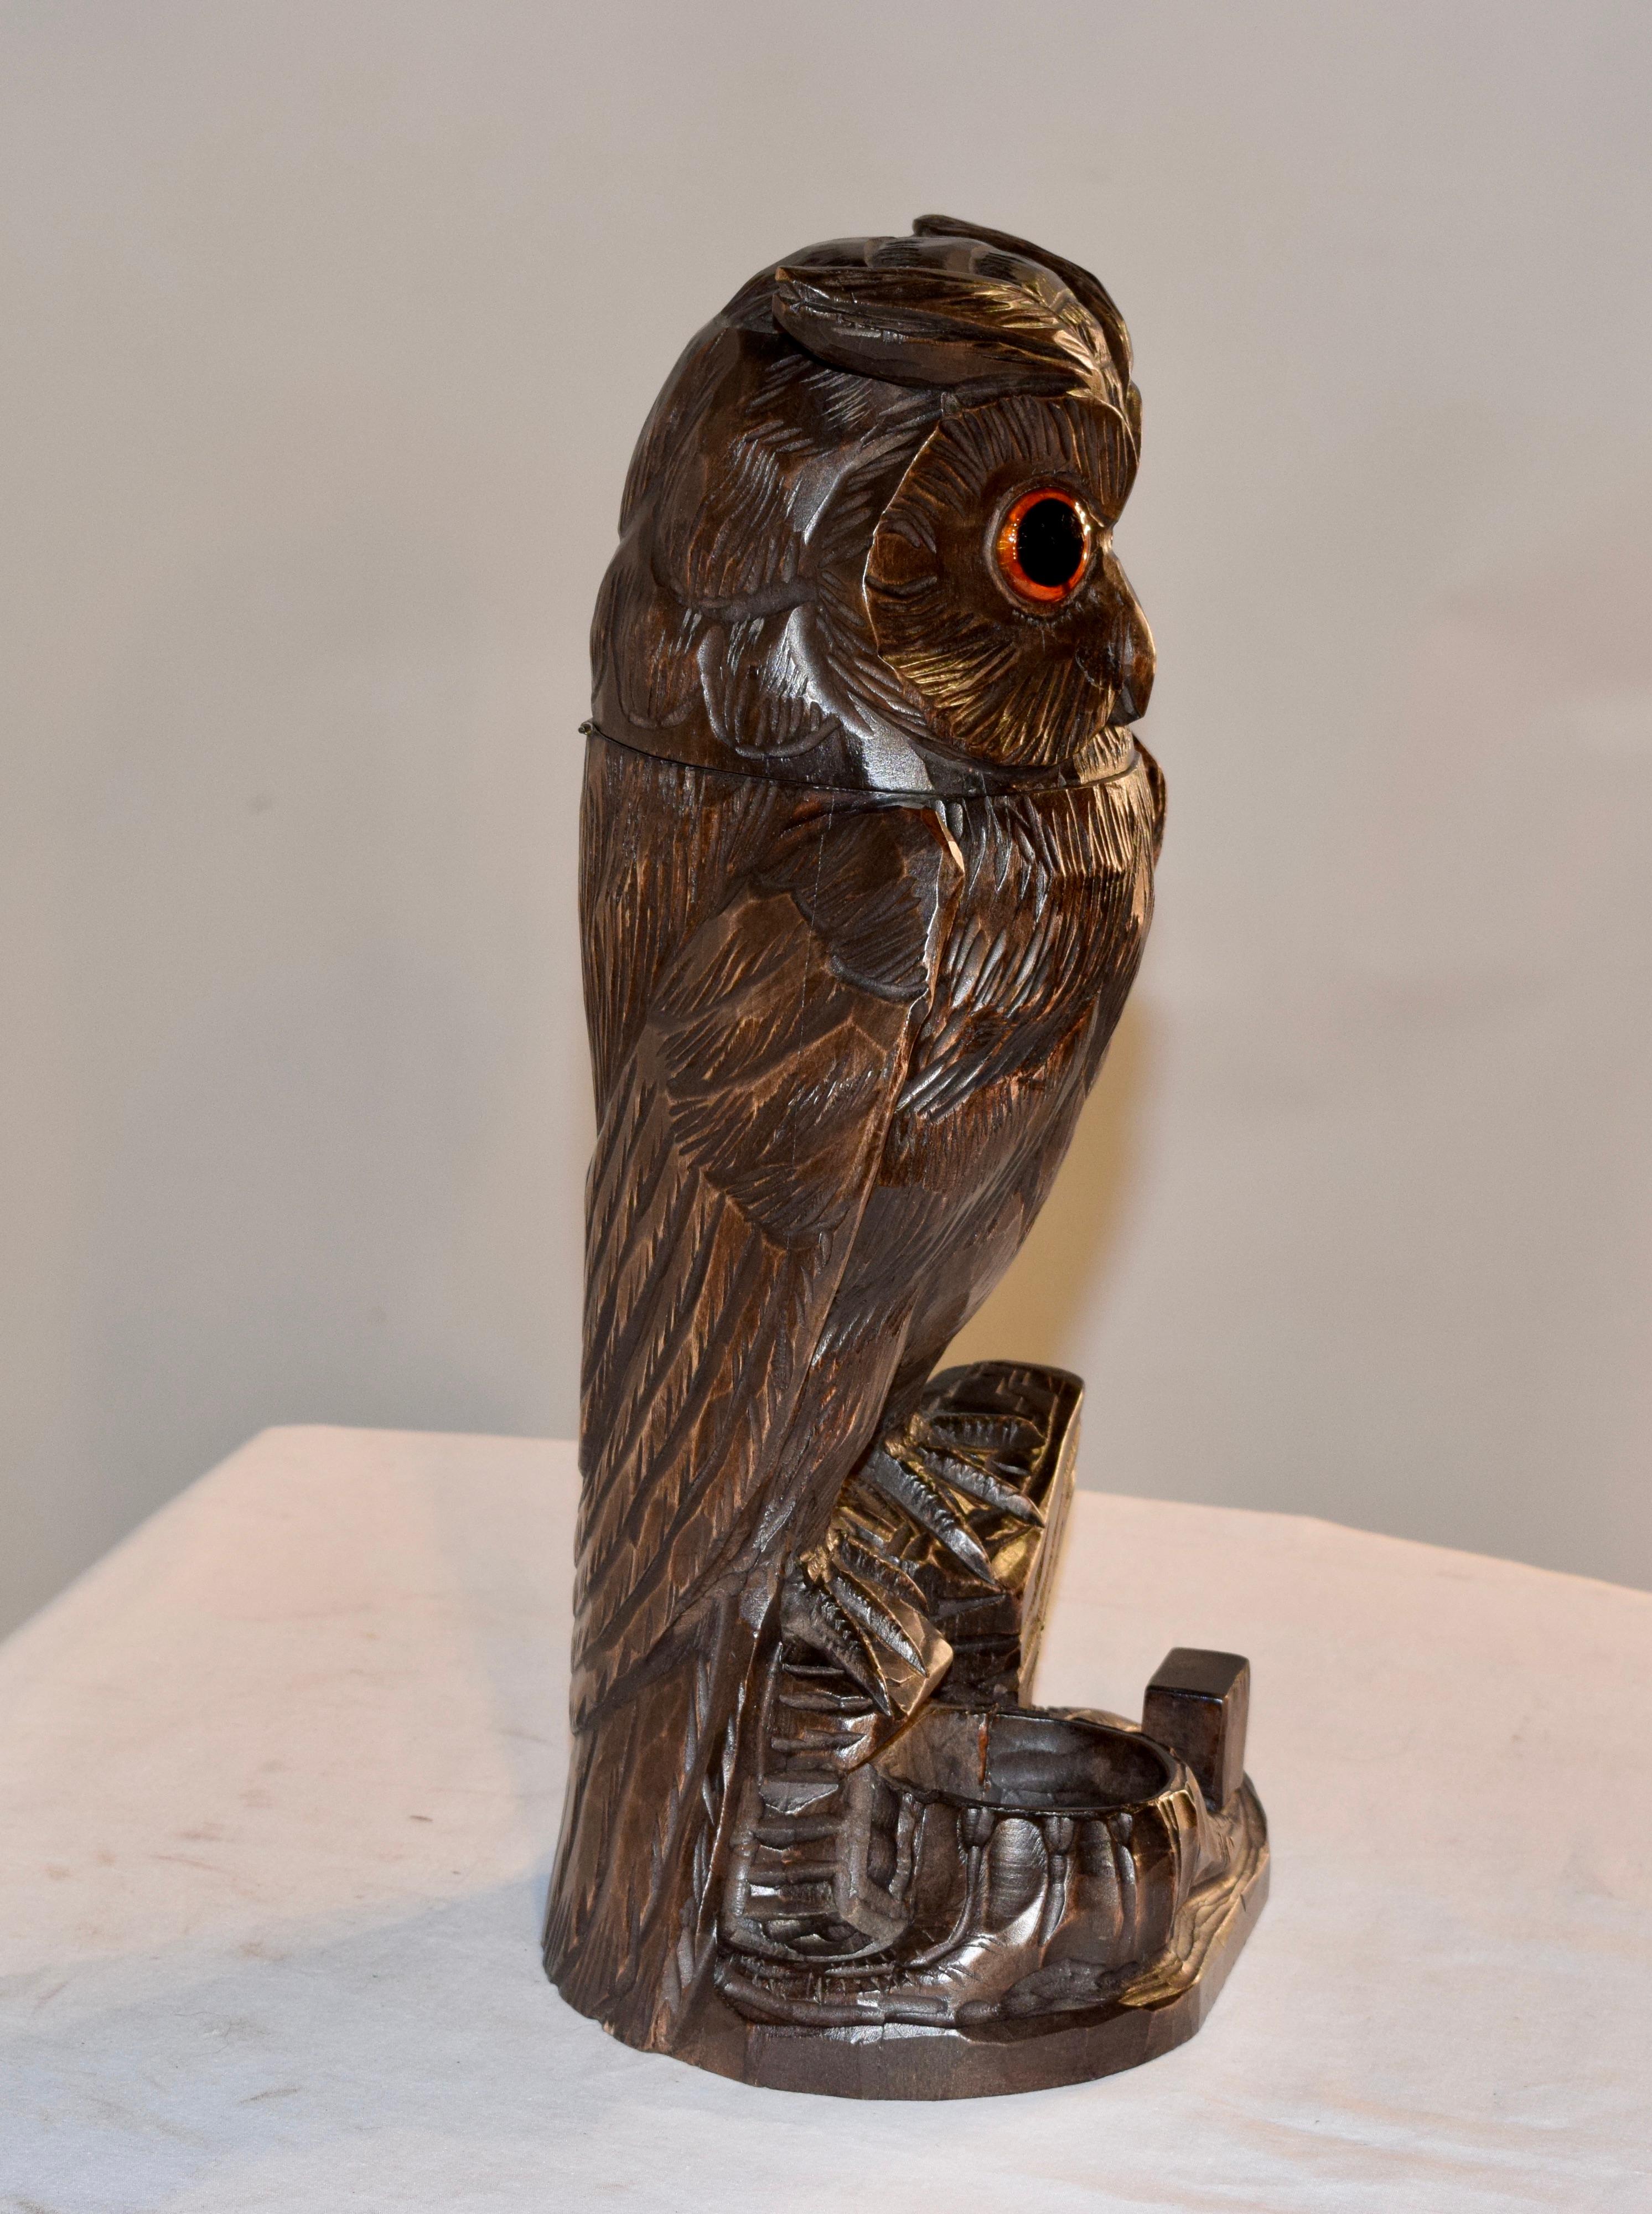 Hand carved humidor in the shape of an owl from Switzerland, circa 1900. The owl's head tilts back to reveal a compartment for tobacco storage.